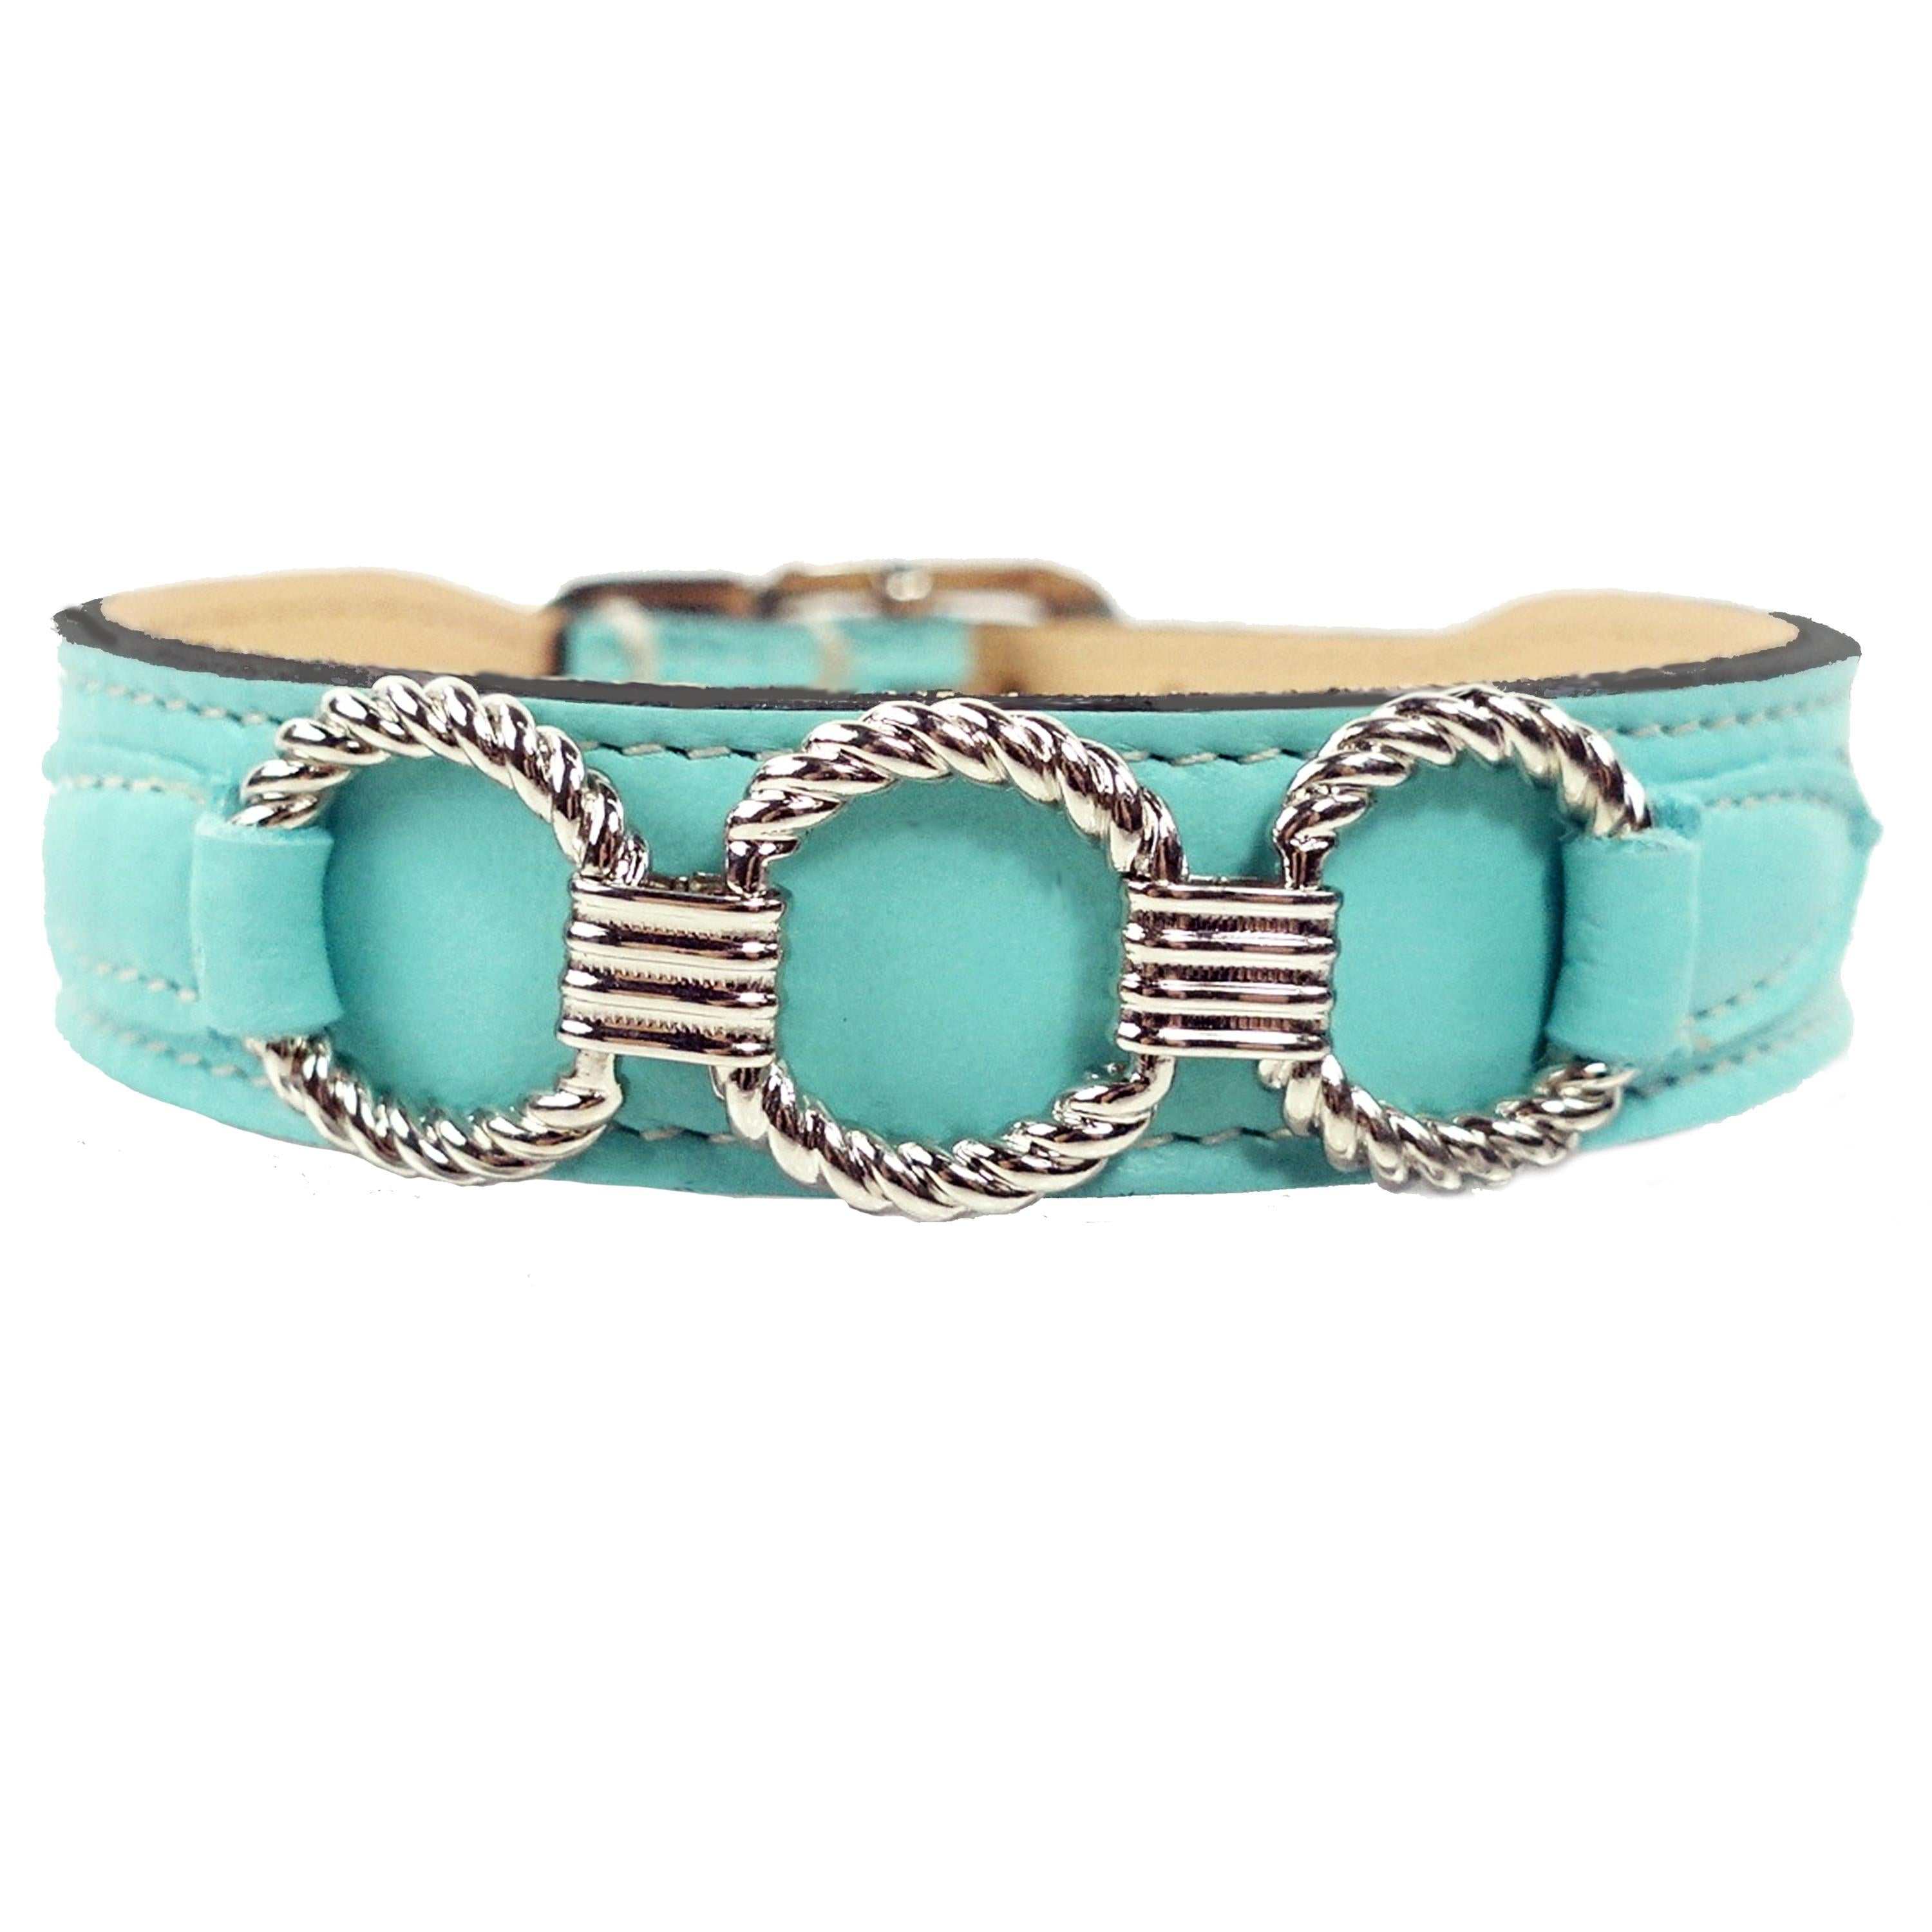 Athena in Turquoise & Nickel